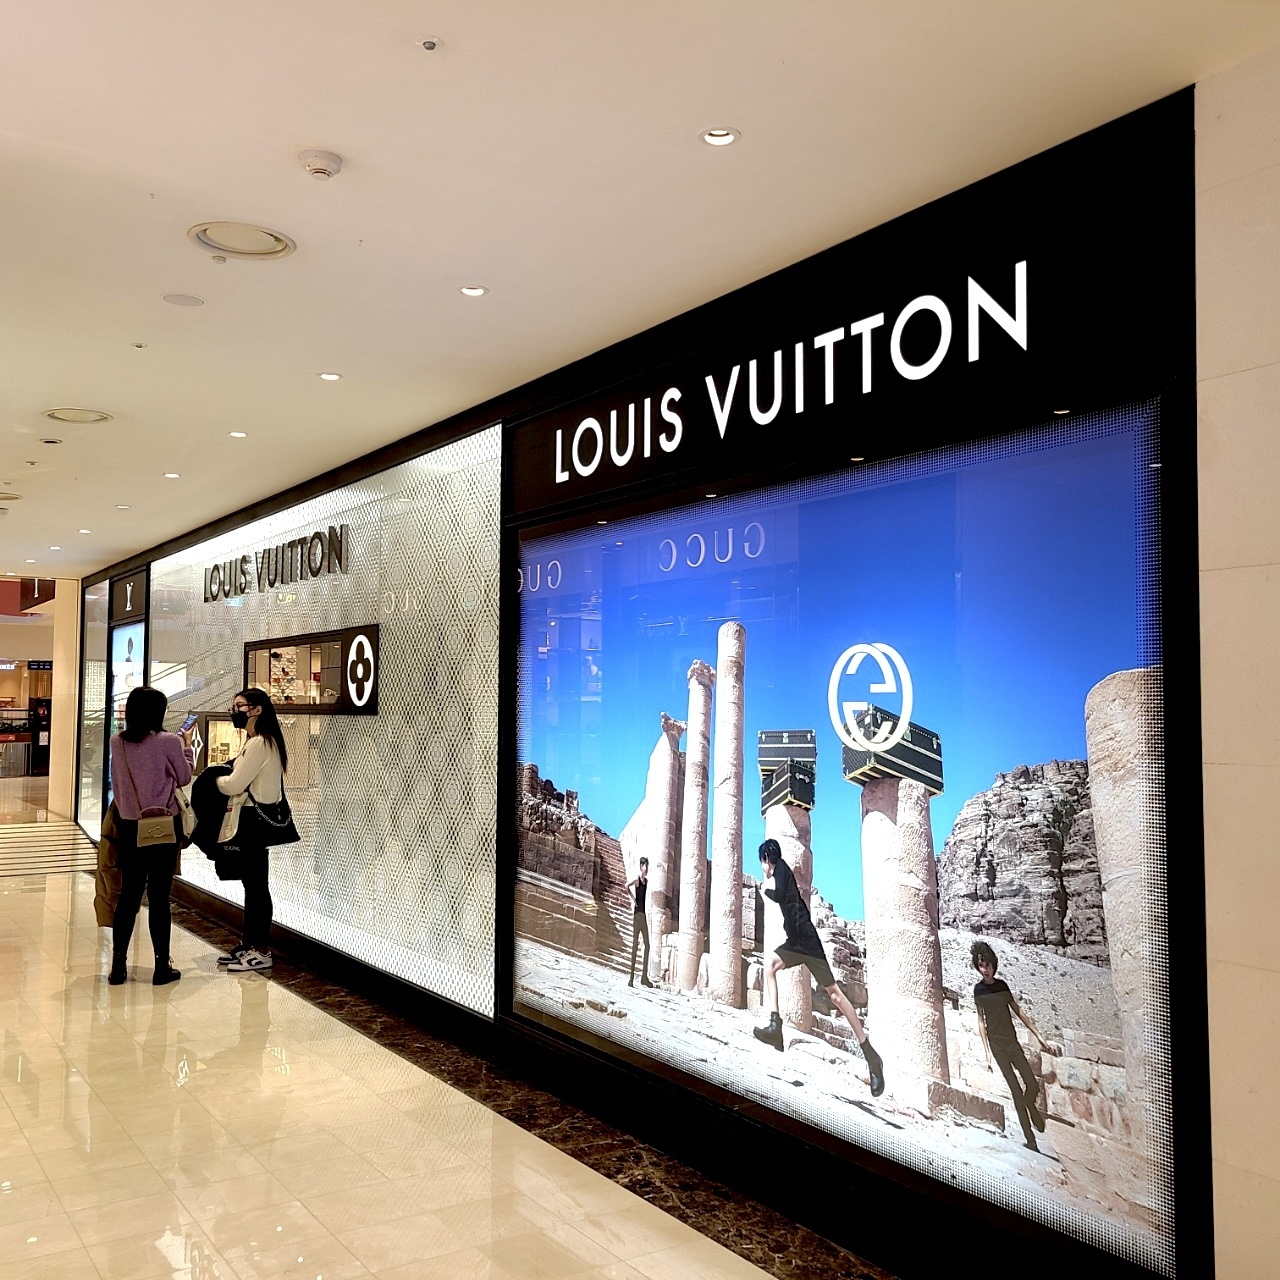 Chinese customers walk pass a Louis Vuitton boutique located in a duty-free store in Seoul. (The Korea Herald/Kang Jae-eun)